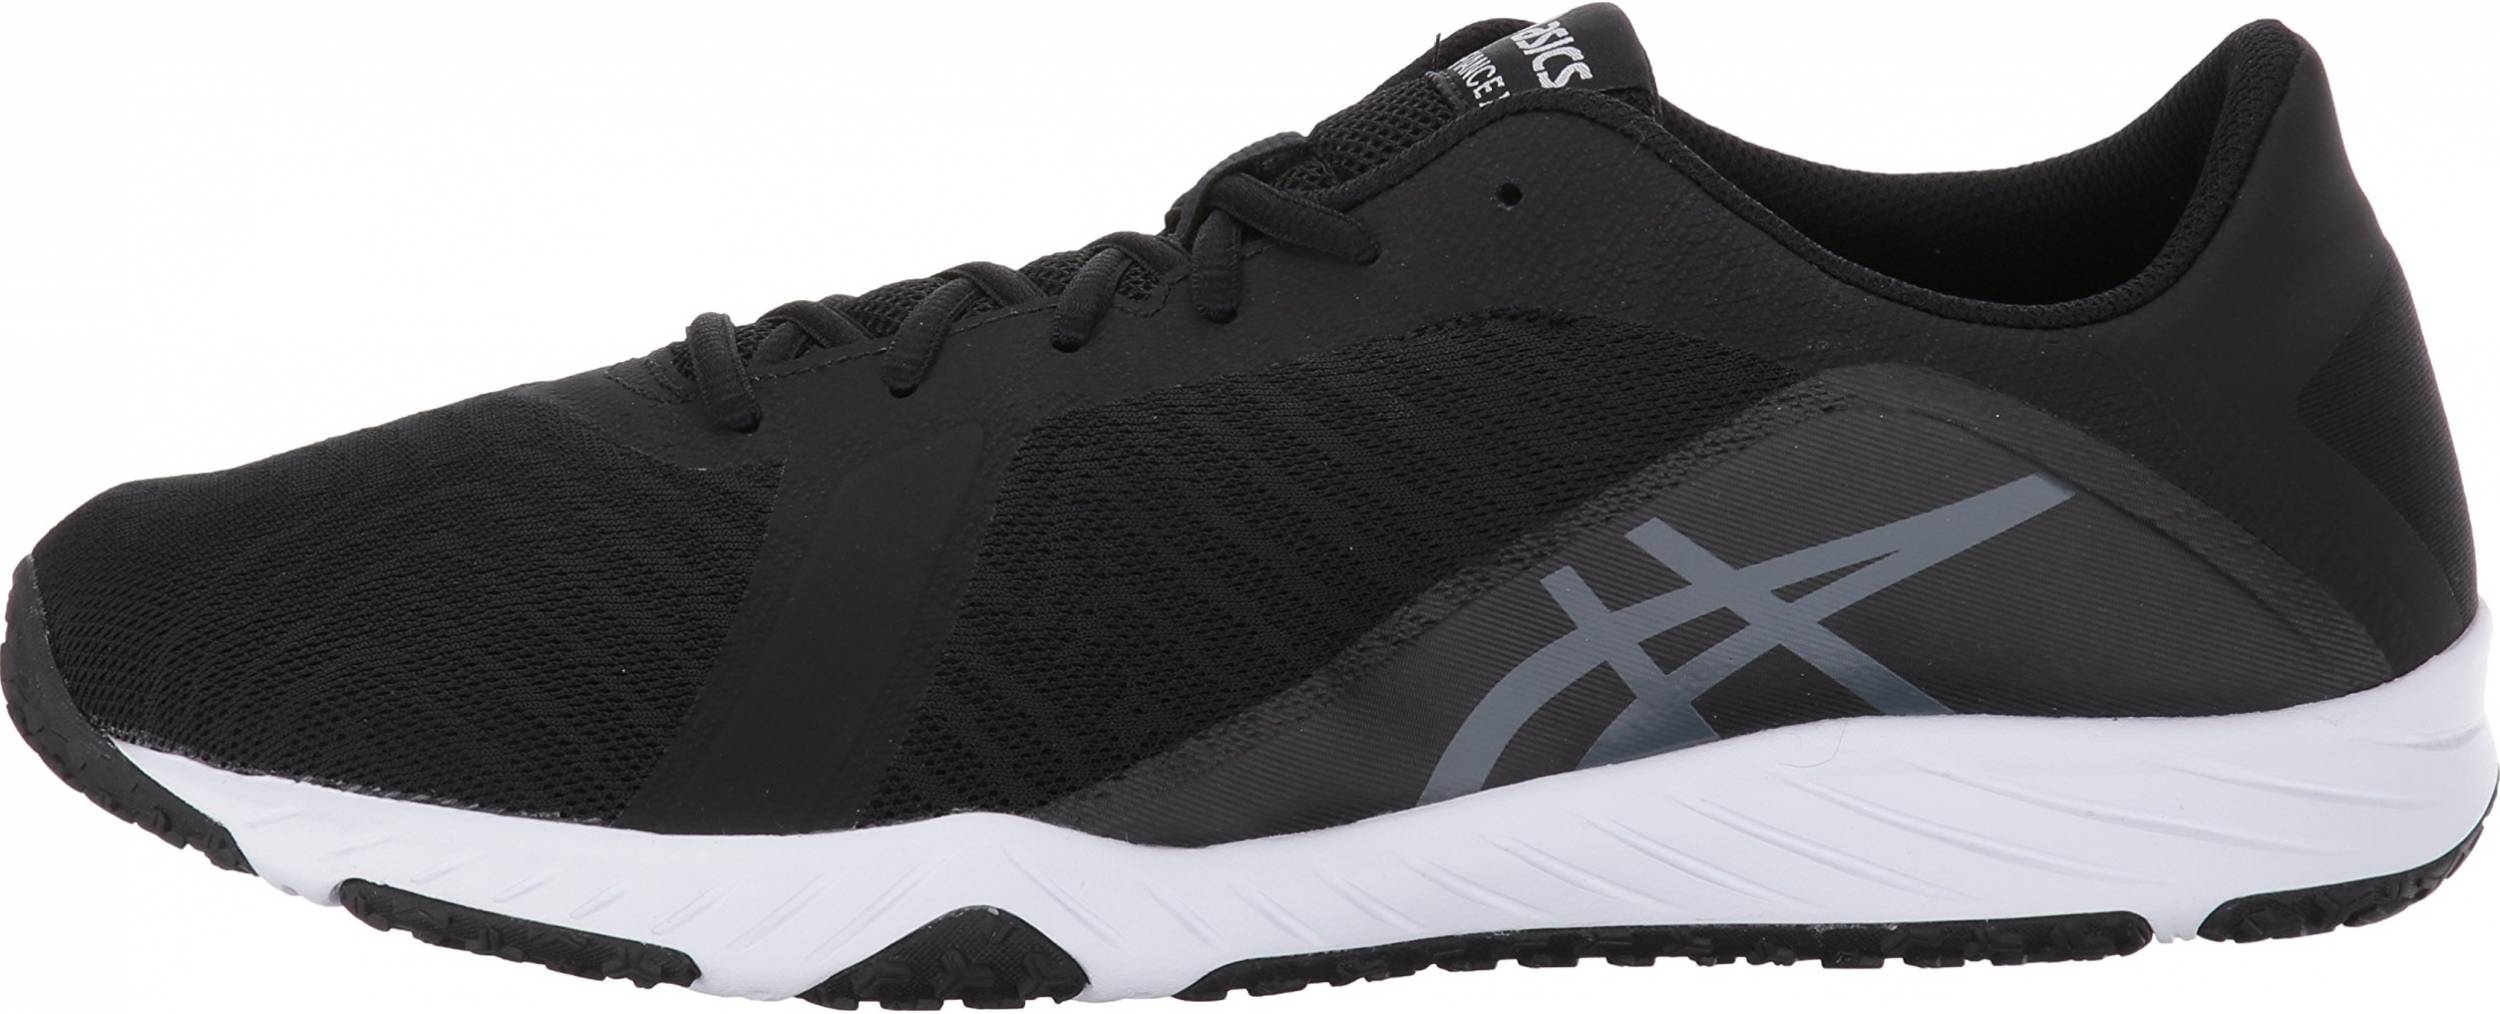 6 Asics workout shoes: Save up to 51 